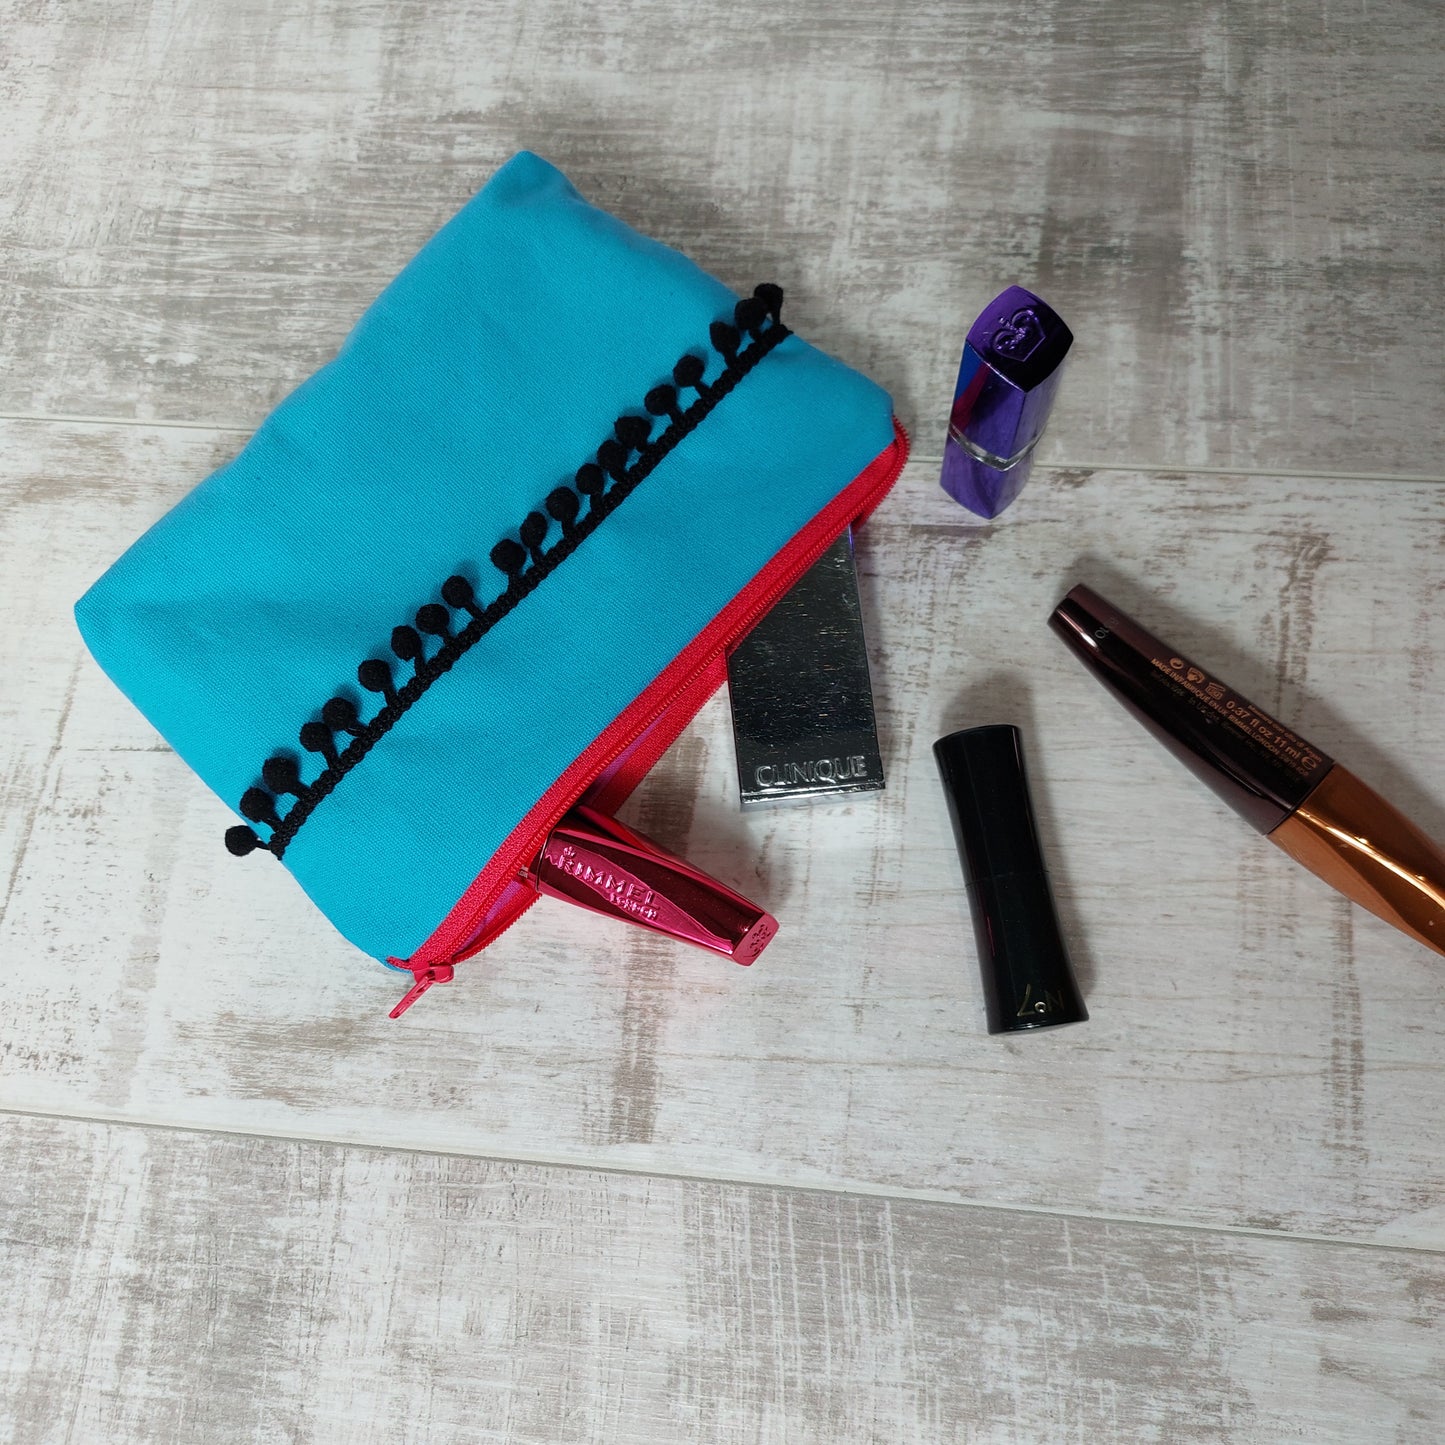 Turquoise Make Up Bag with Pom Poms